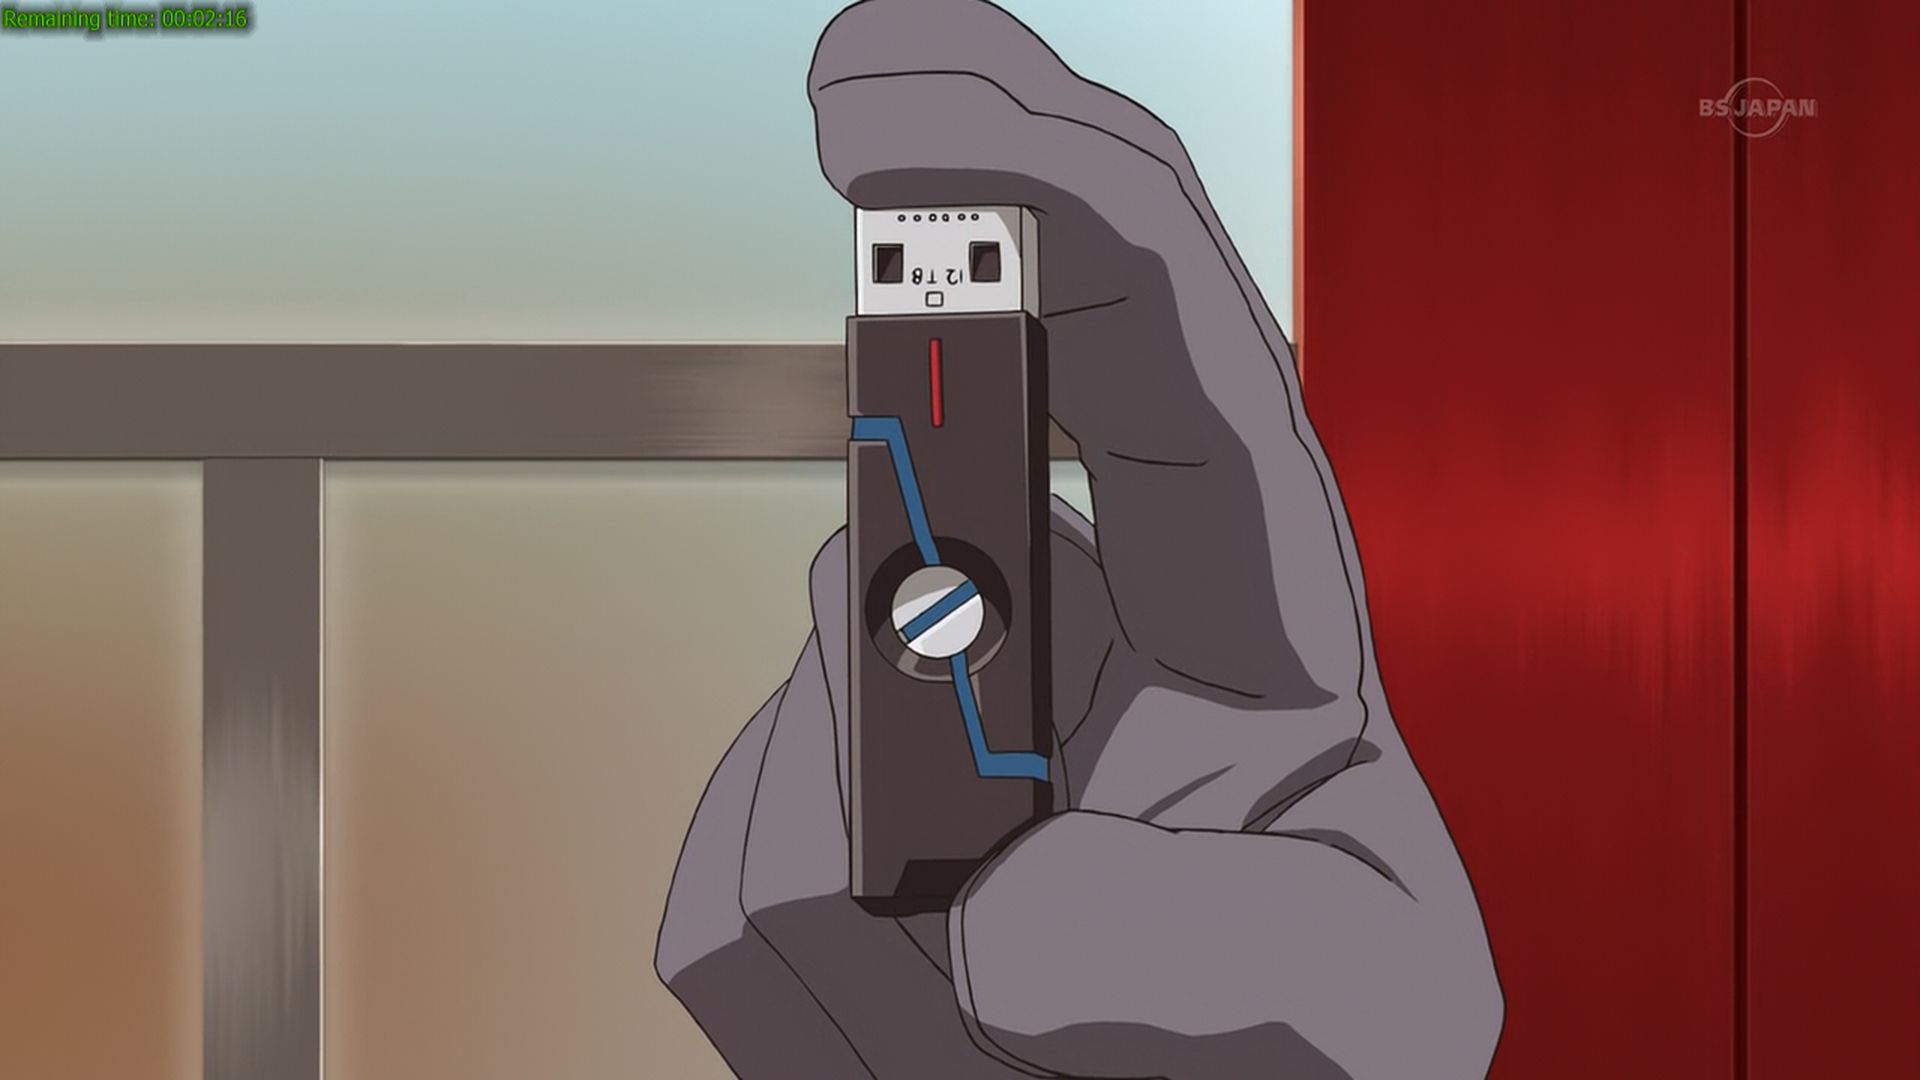 Personally, the greatest device you can find in this anime version of 2050 is not the LBX or the fortified cardboard, but the 12 Terabytes pen drive as shown above. It is funny though that that pen drive still use USB connector instead of something like Thunderbolt connector. Transferring files into/from that pendrive will surely takes hours!